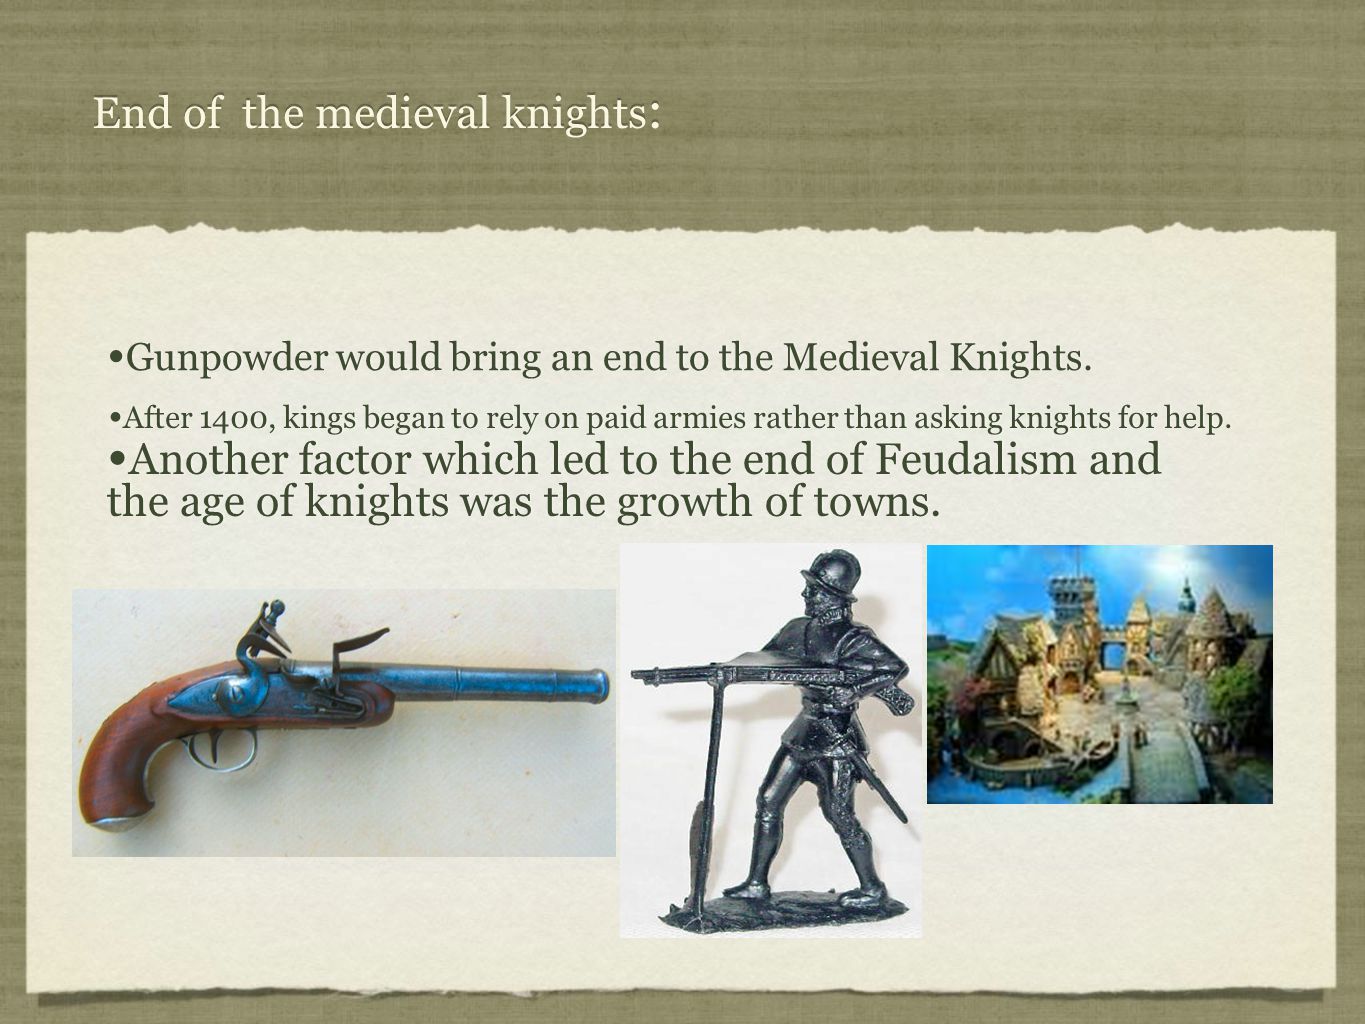 End of the medieval knights : Gunpowder would bring an end to the Medieval Knights.